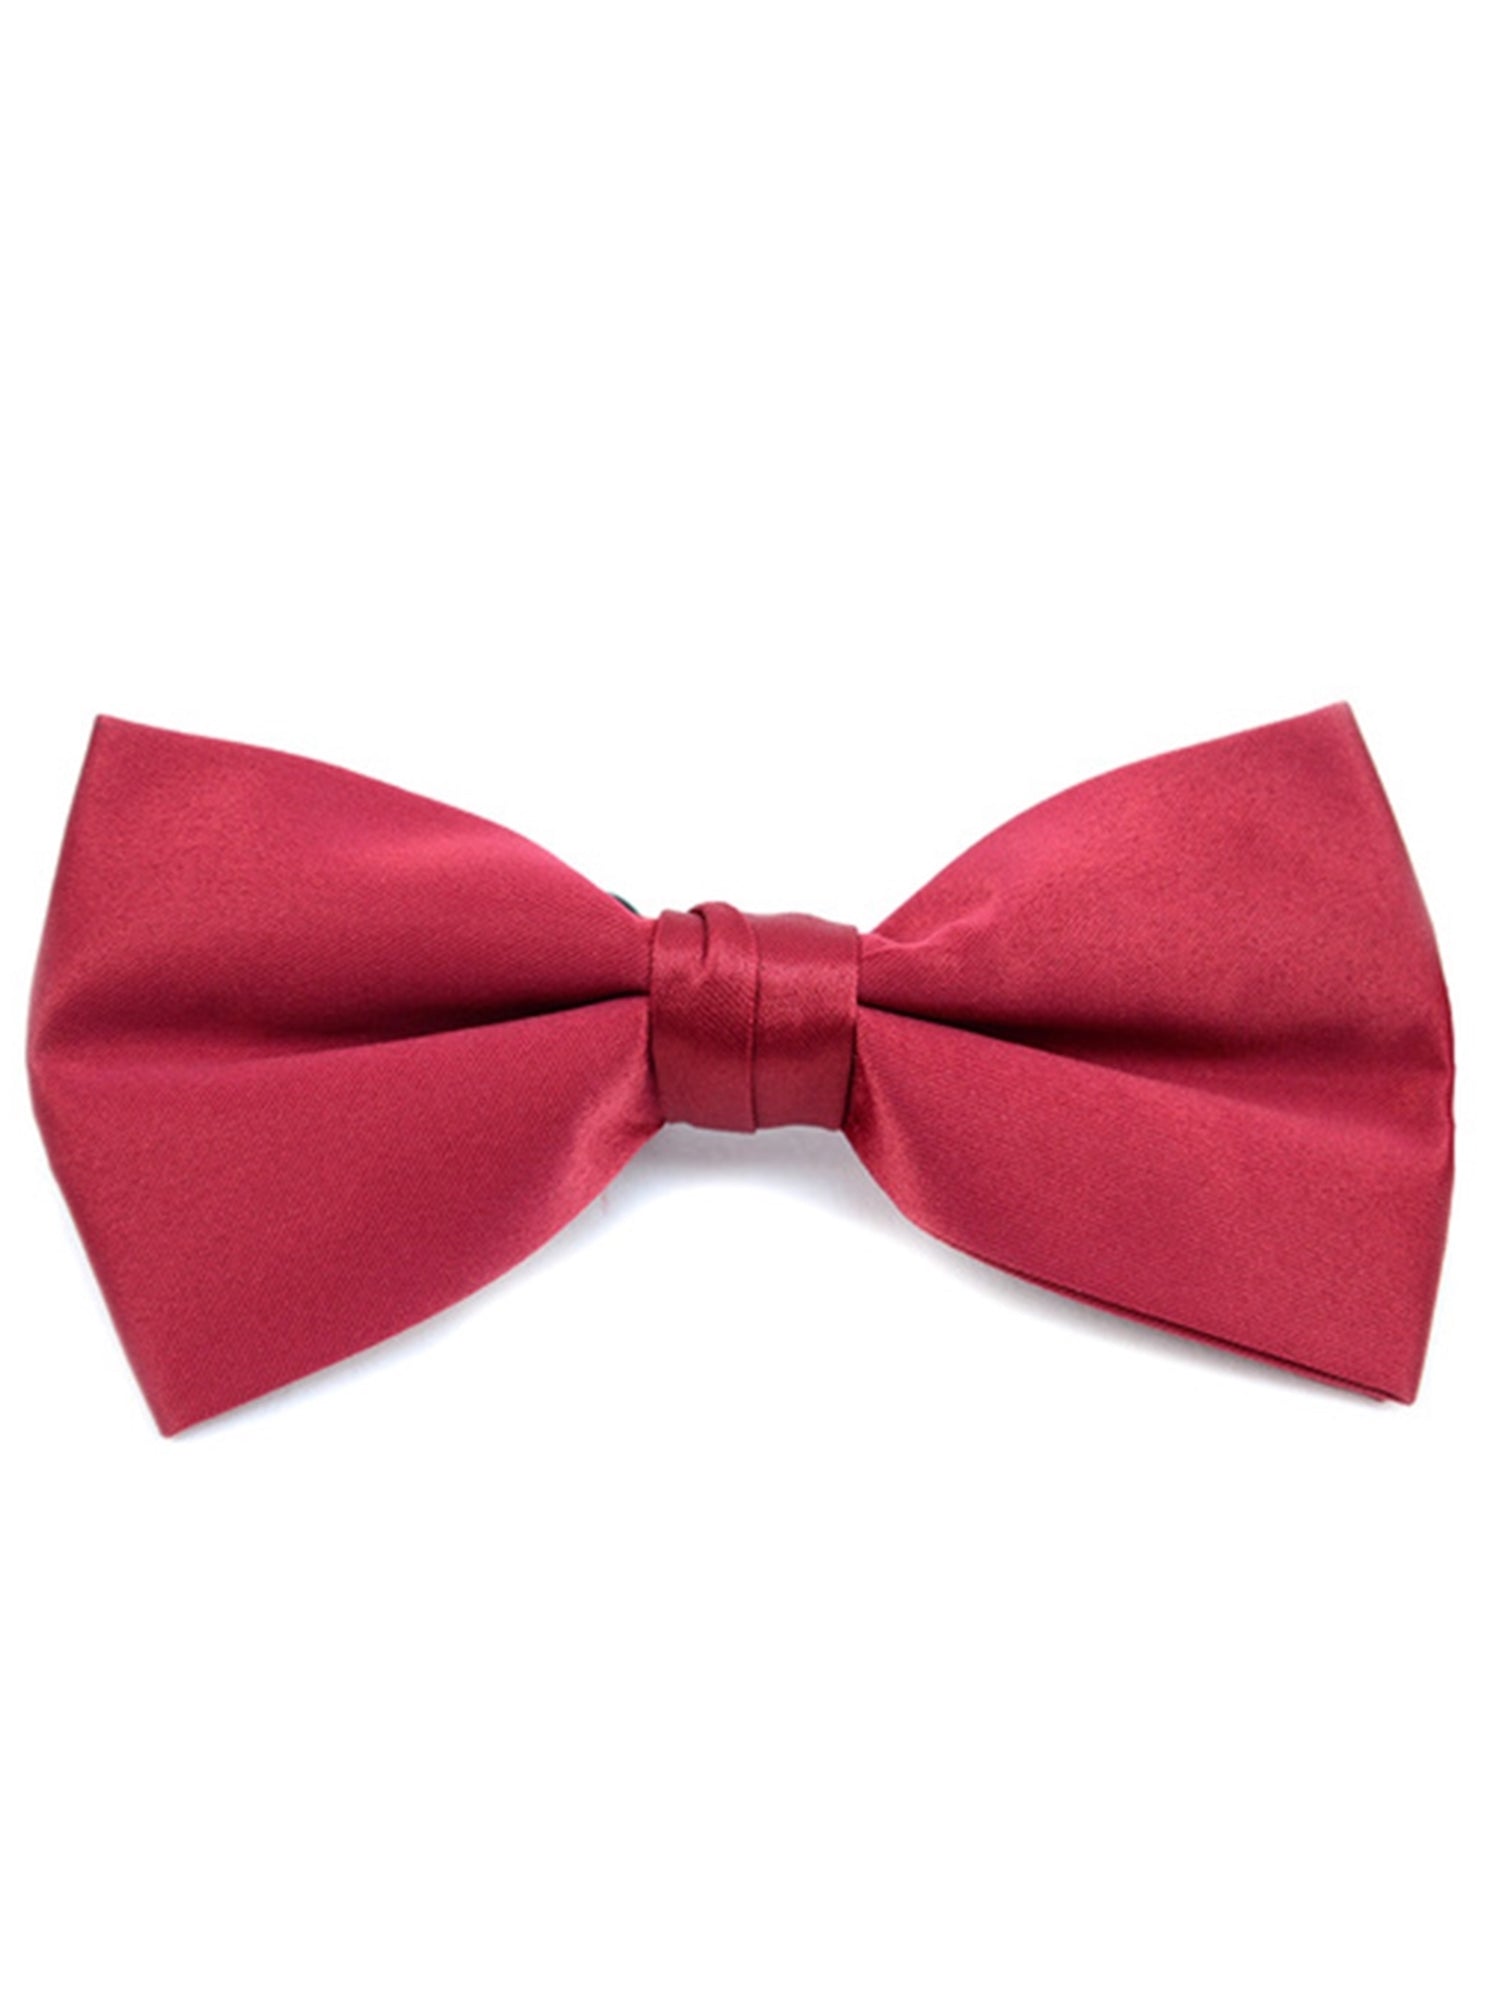 Young Boy's Pre-tied Clip On Bow Tie - Formal Tuxedo Solid Color Boy's Solid Color Bow Tie TheDapperTie Burgundy One Size 